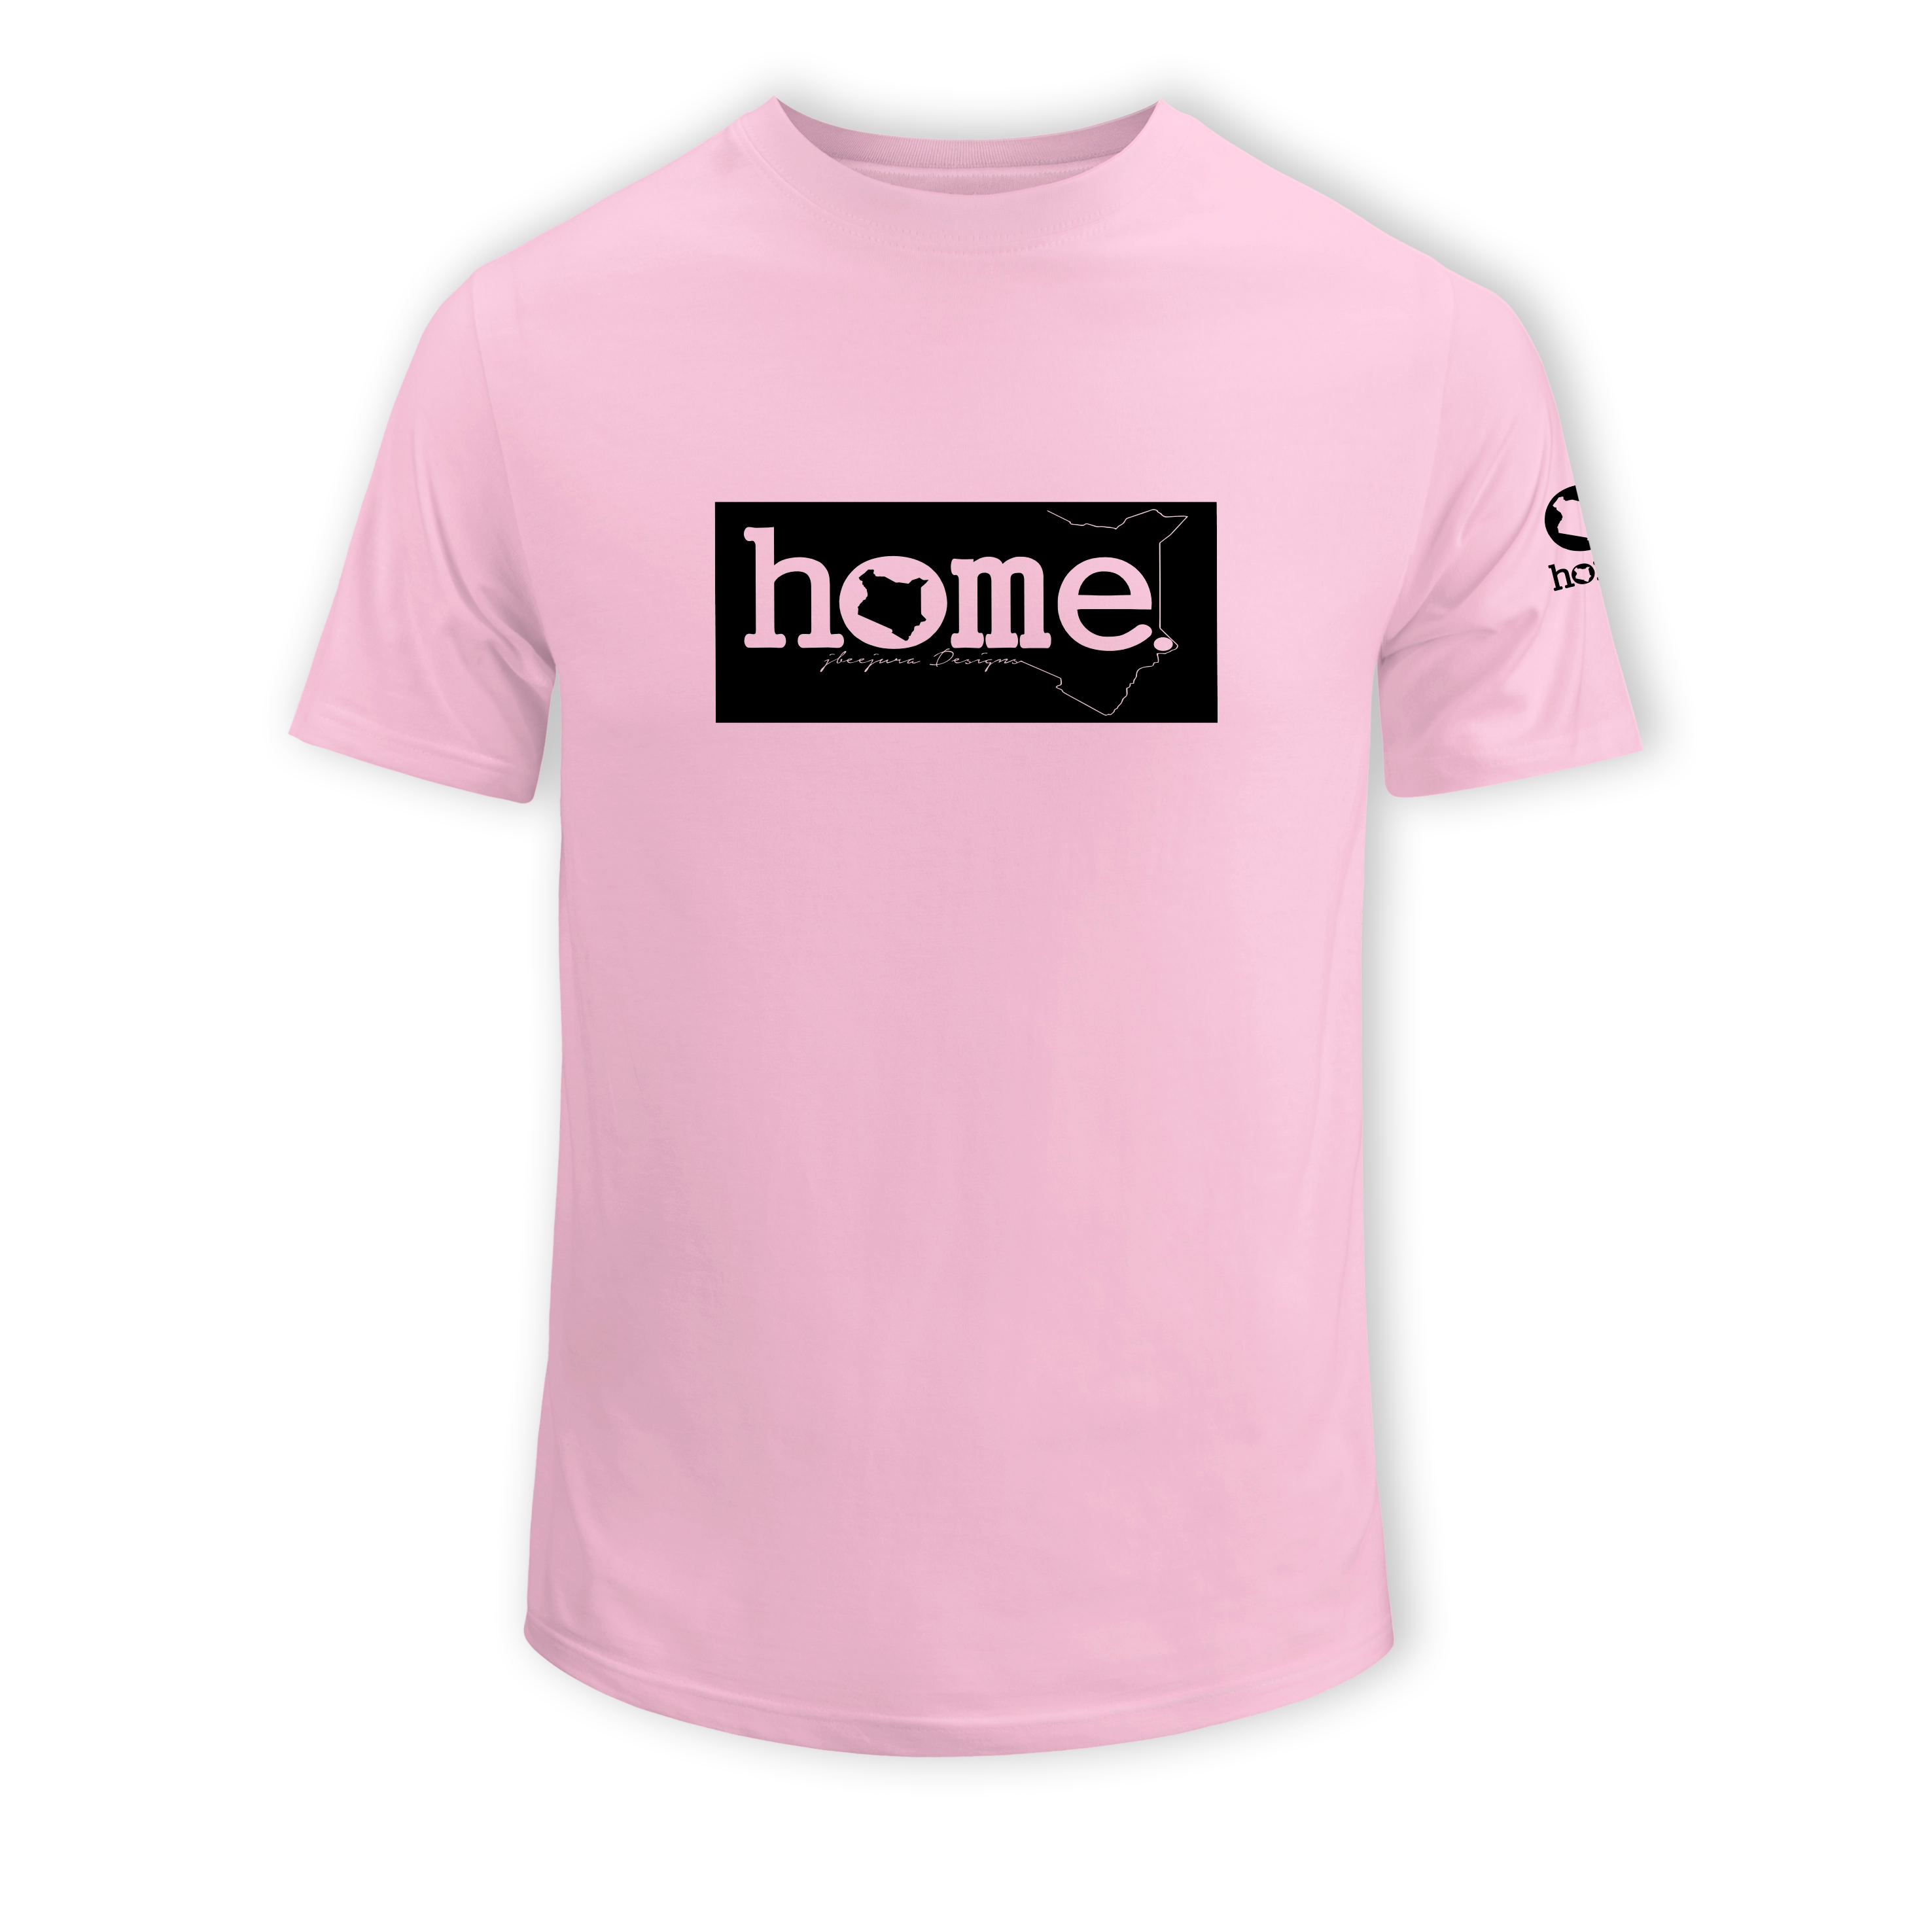 home_254 KIDS SHORT-SLEEVED PINK T-SHIRT WITH A BLACK CLASSIC PRINT – COTTON PLUS FABRIC